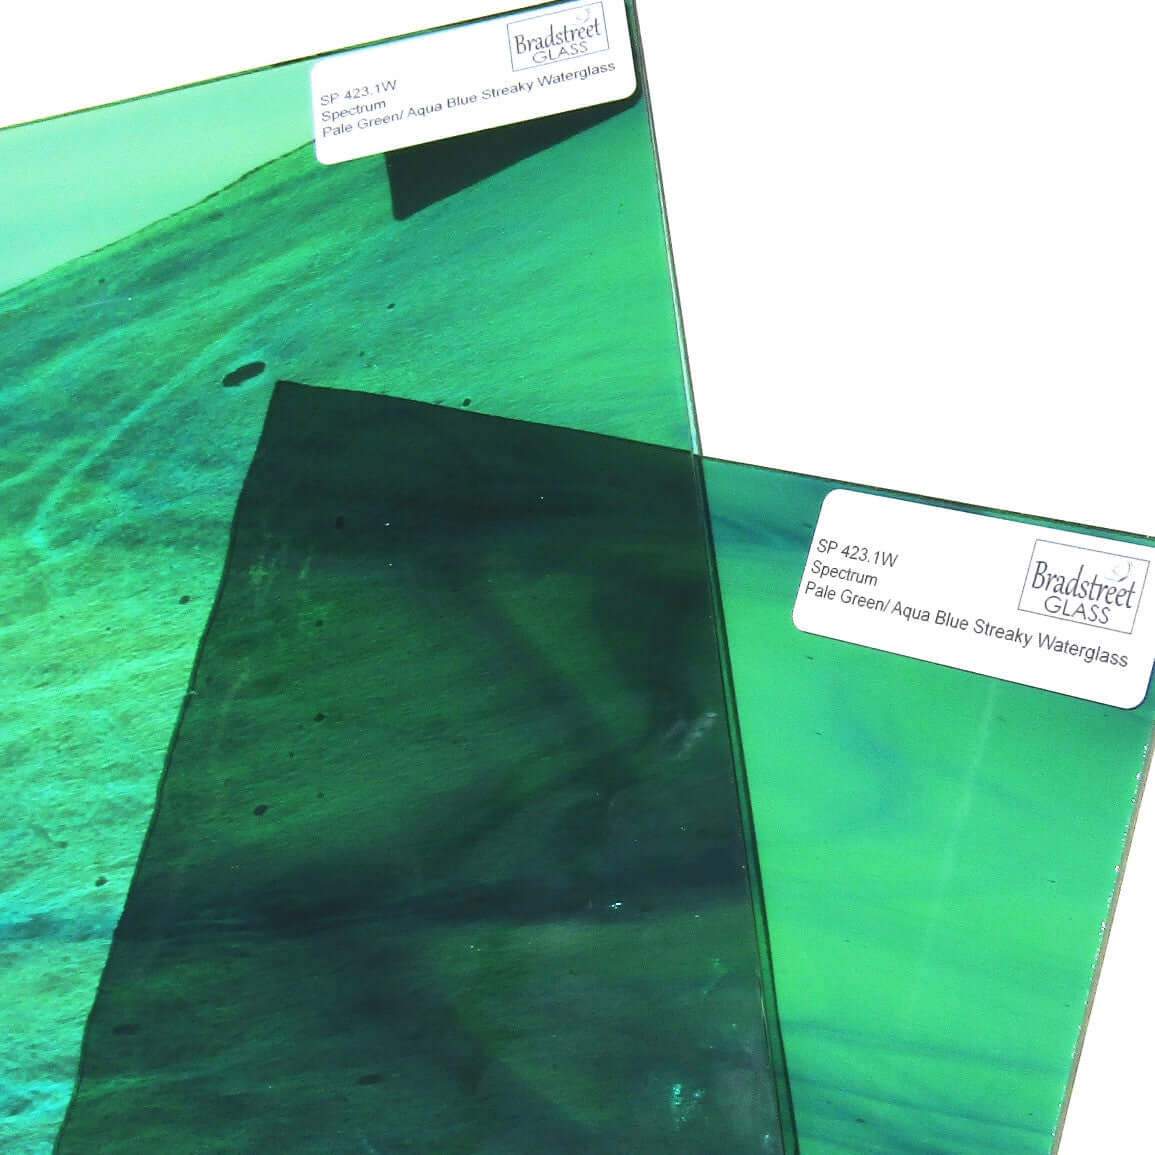 Spectrum Pale Green Aqua Blue Streaky Waterglass Textured Cathedral Stained Glass Sheet SP 423.1W